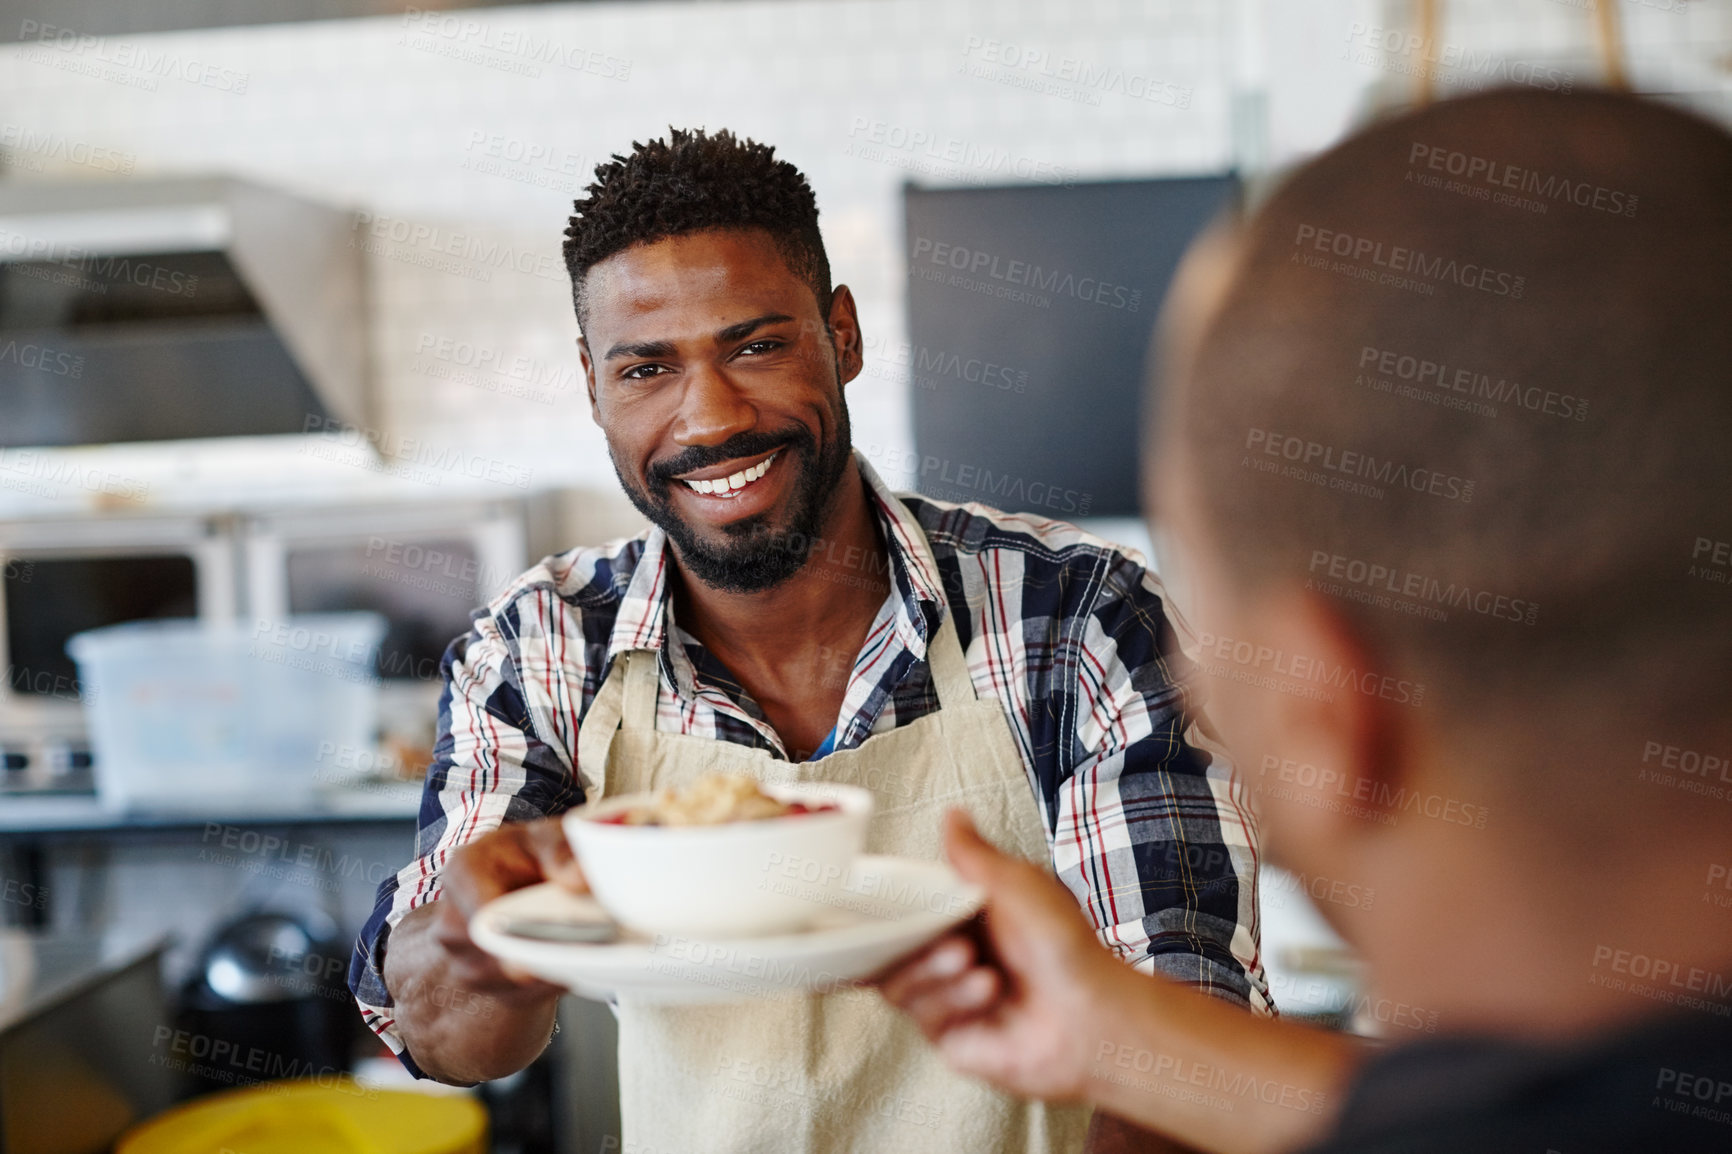 Buy stock photo Cropped shot of a young man serving a customer at a cafe